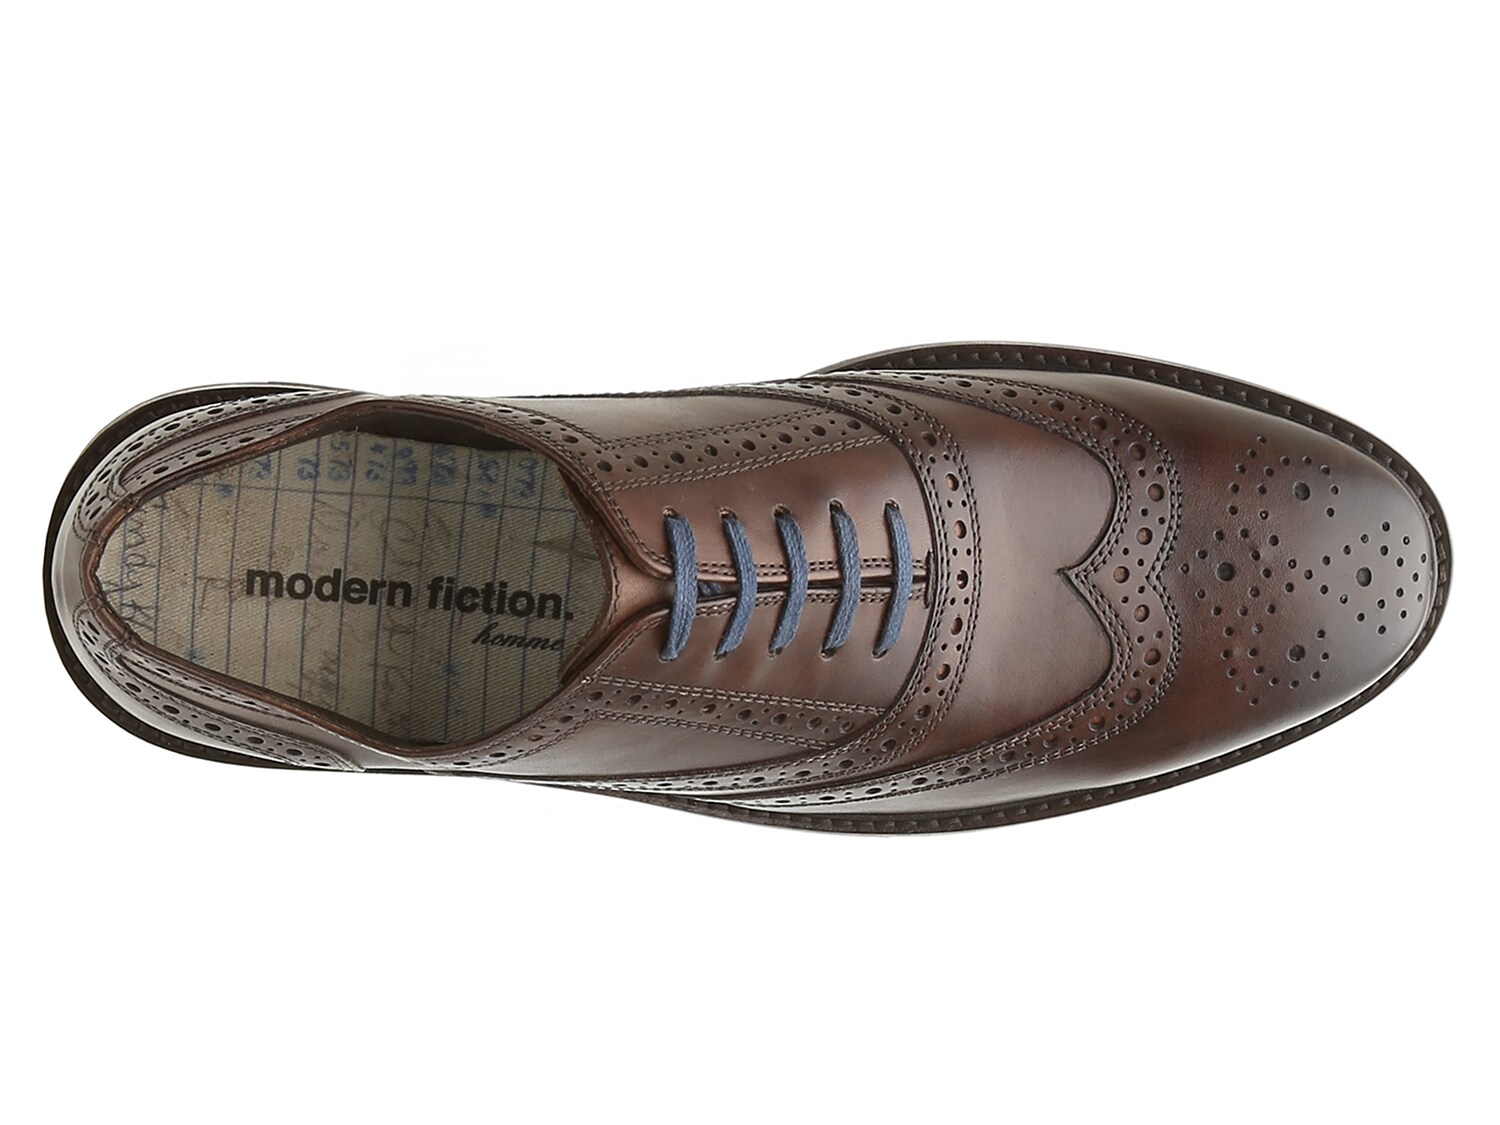 modern fiction soliloquy wingtip oxford